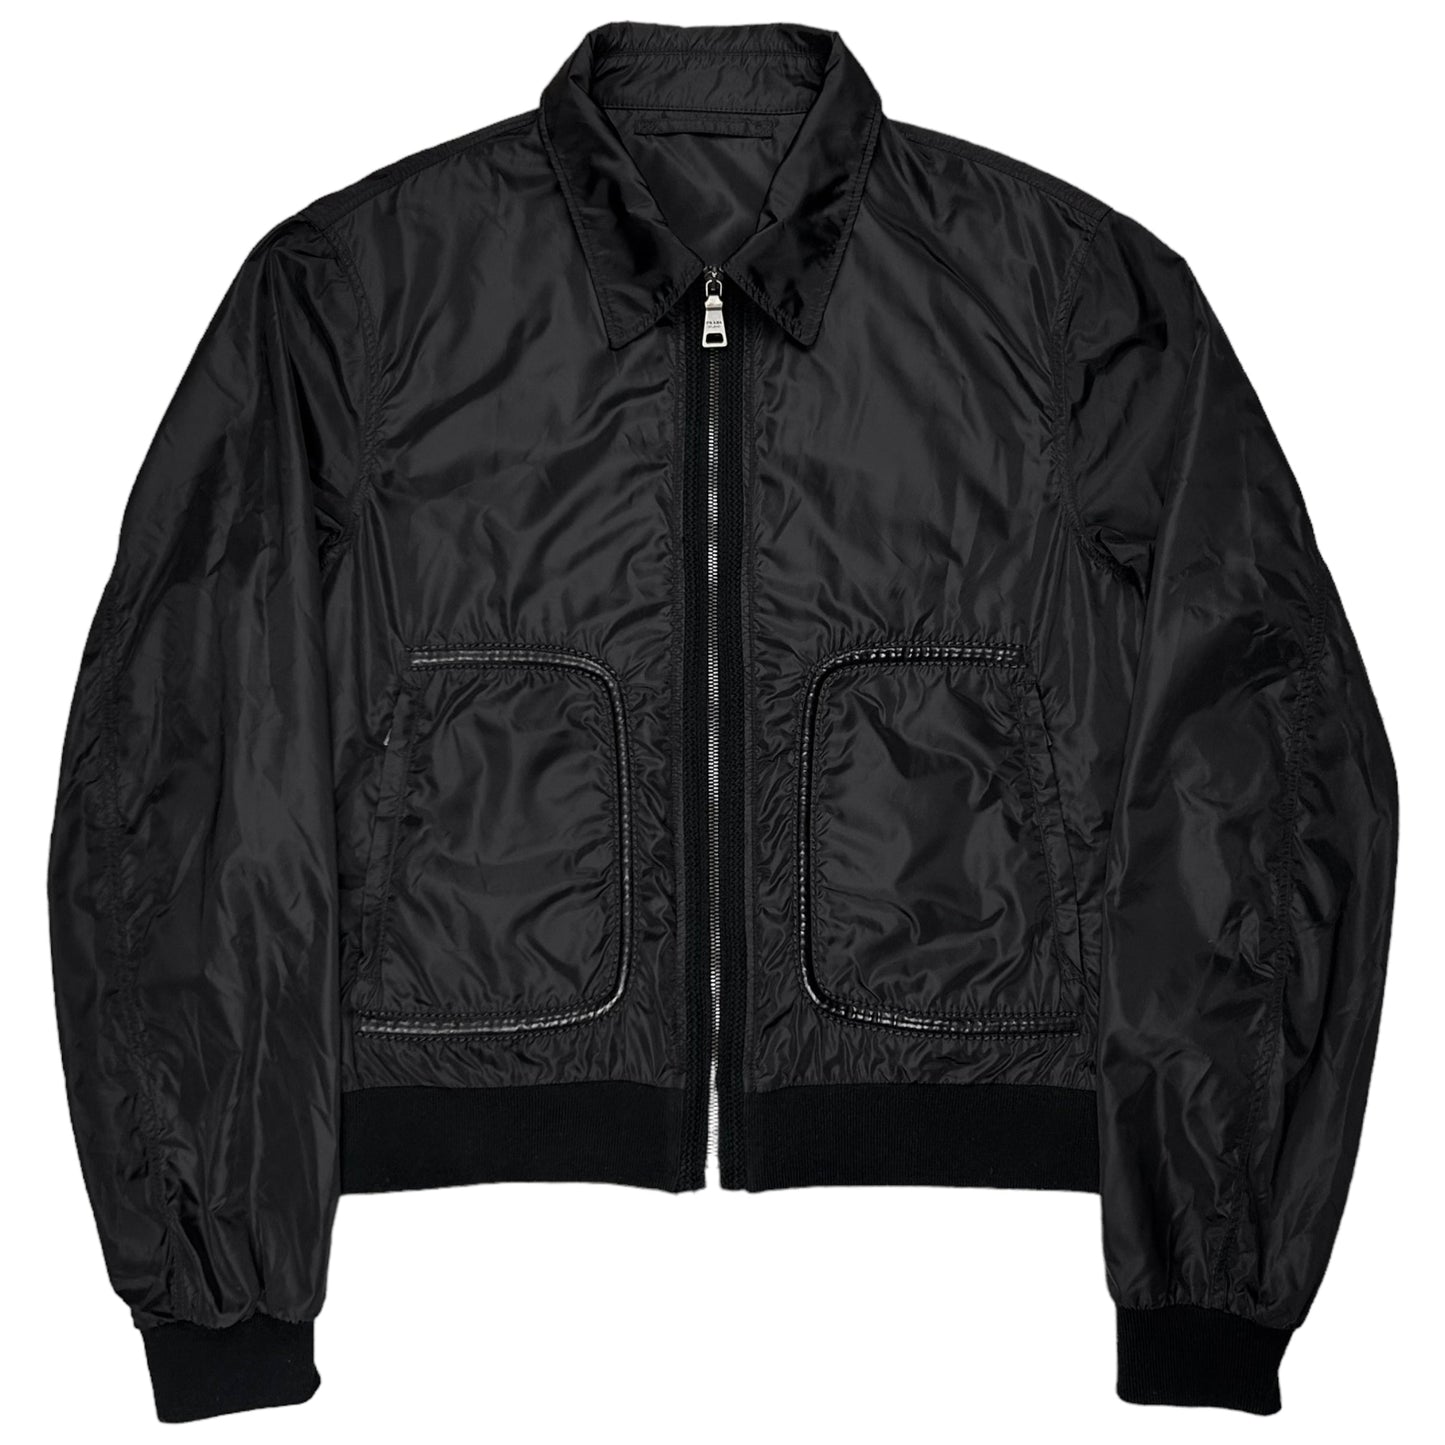 Prada Leather Piped Pockets Work Jacket - SS10